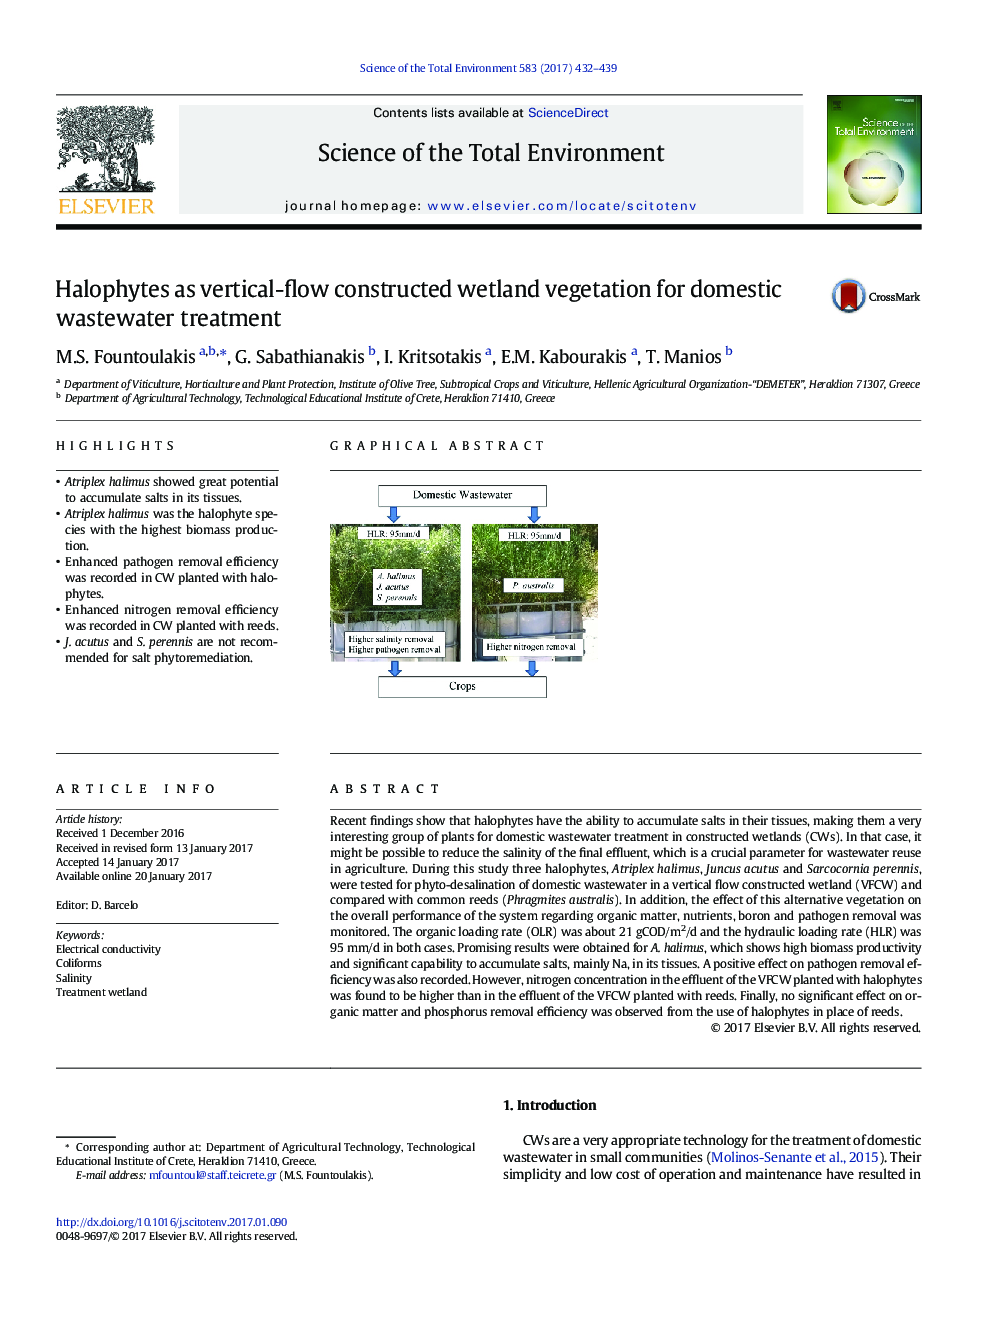 Halophytes as vertical-flow constructed wetland vegetation for domestic wastewater treatment